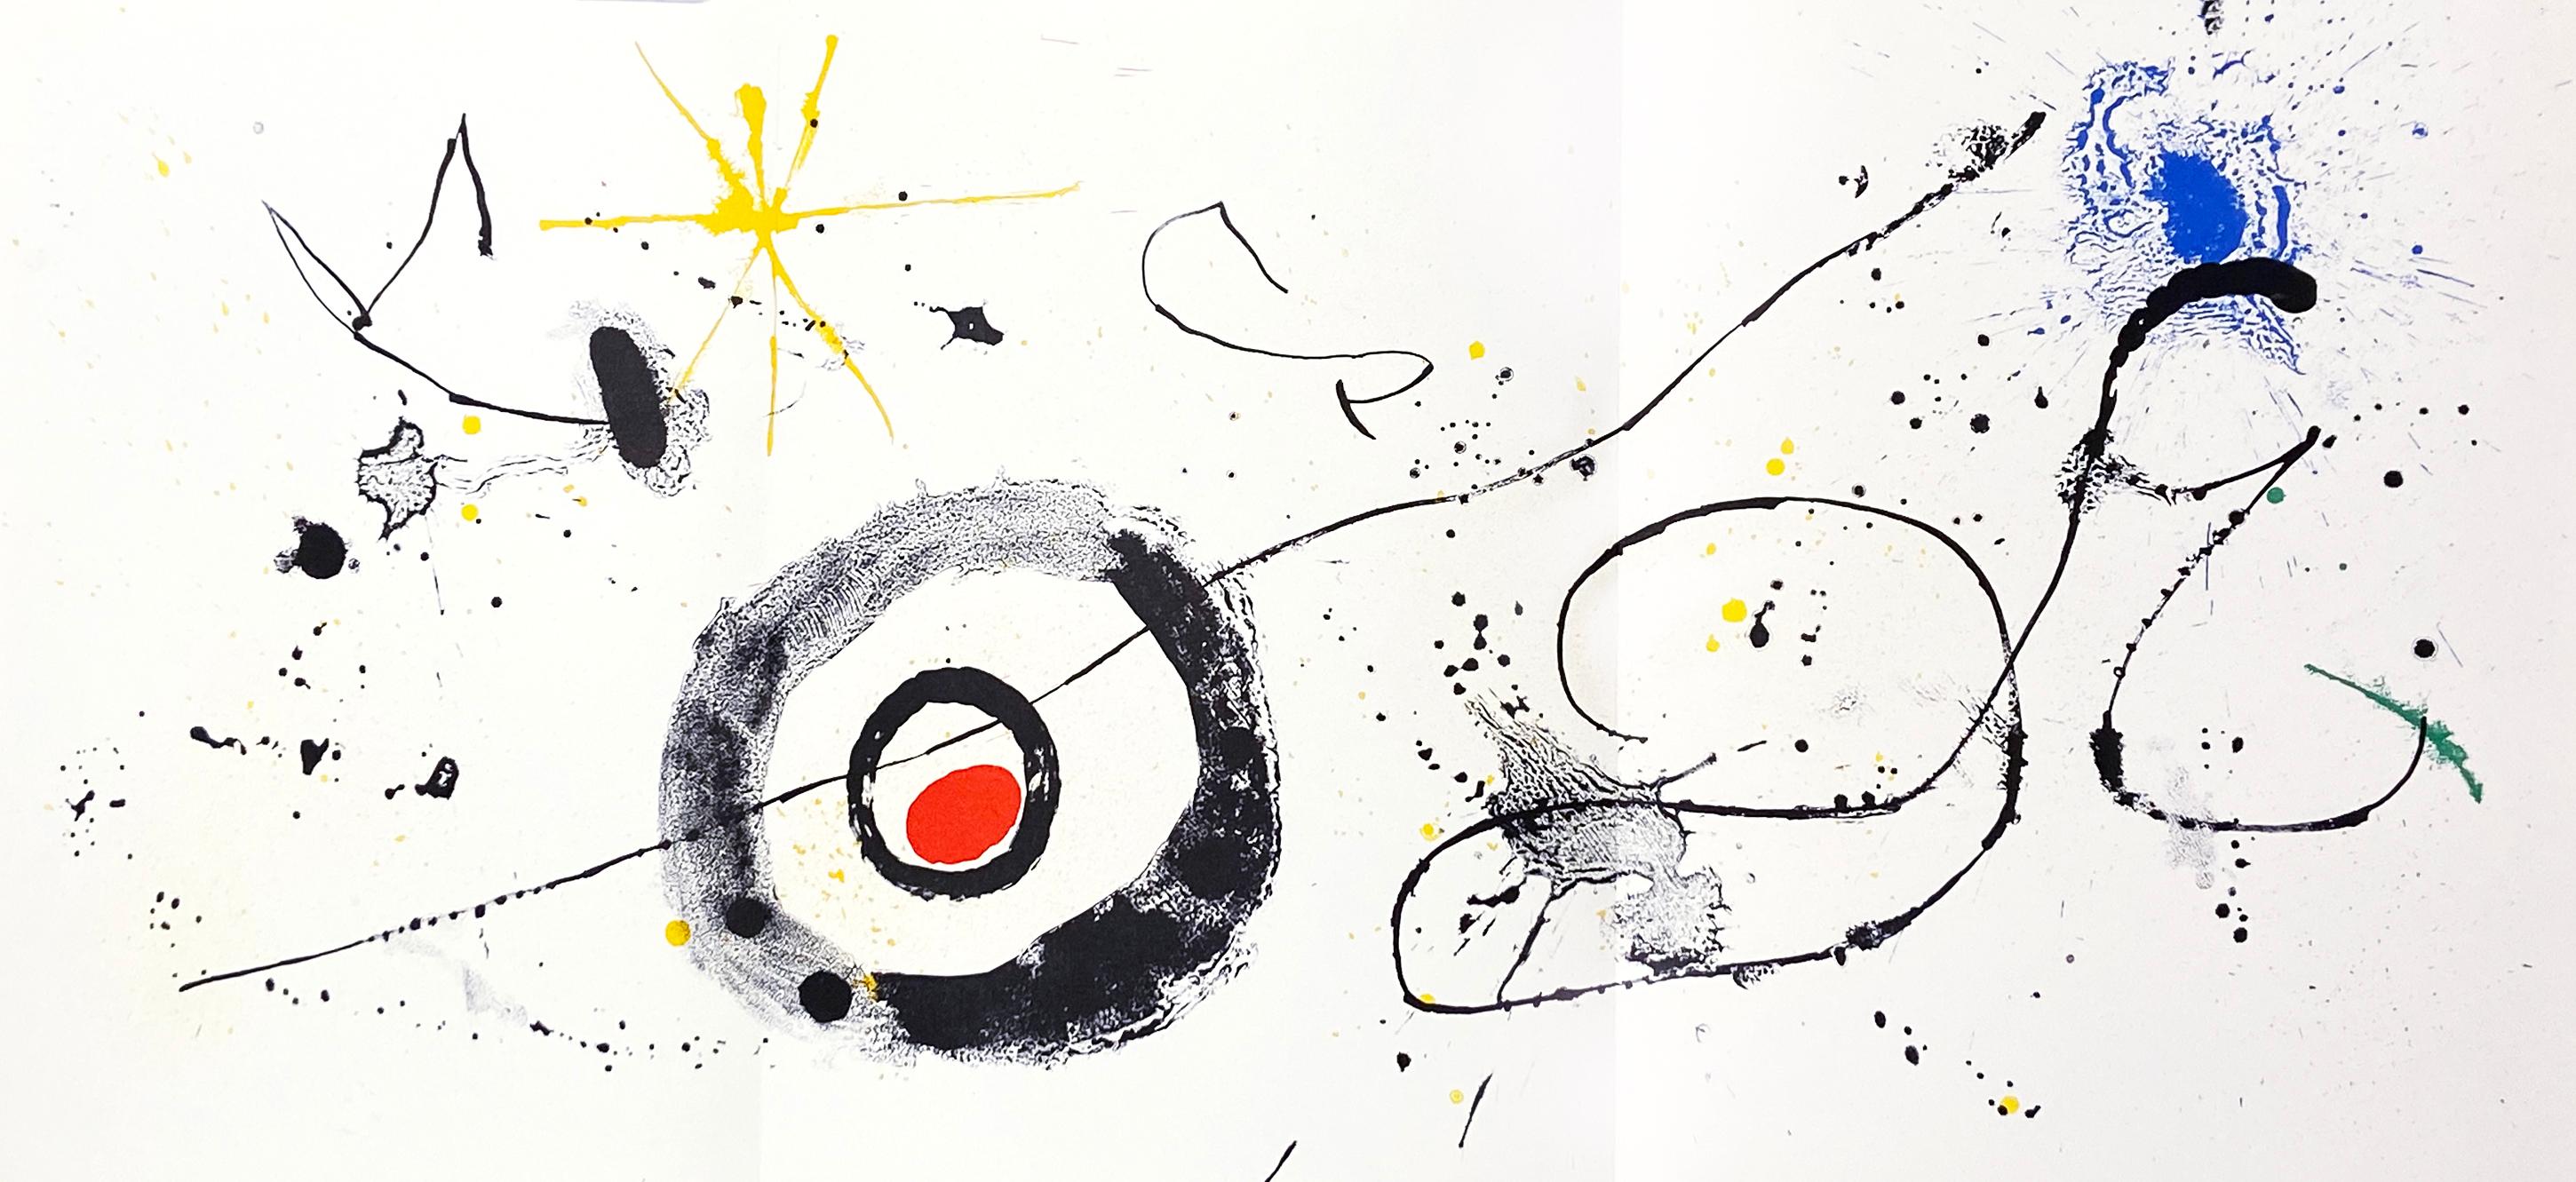 1960s Joan Miró Lithograph:
Portfolio: Derriere Le Miroir, 1963.
Published by: Galerie Maeght, Paris. 

Off-set lithograph in colors.
15 x 33 inches.
Well preserved; very good overall vintage condition with fold-lines as originally issued.
Unsigned